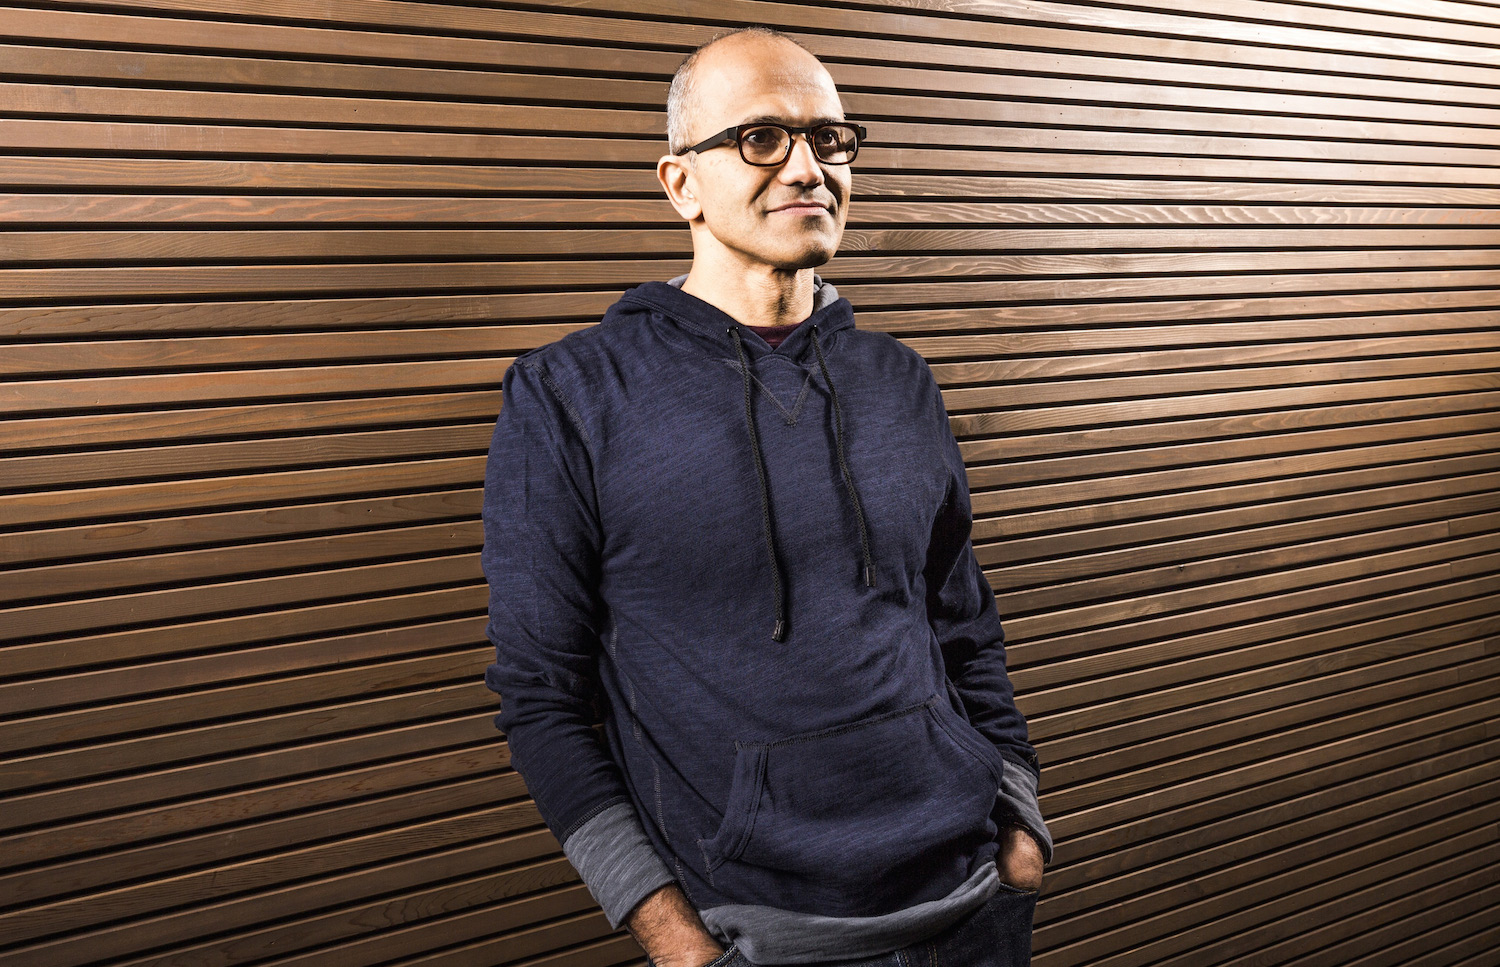 We Asked Microsoft’s Chat Bot What It Thinks About Satya Nadella's A.I. Rules
